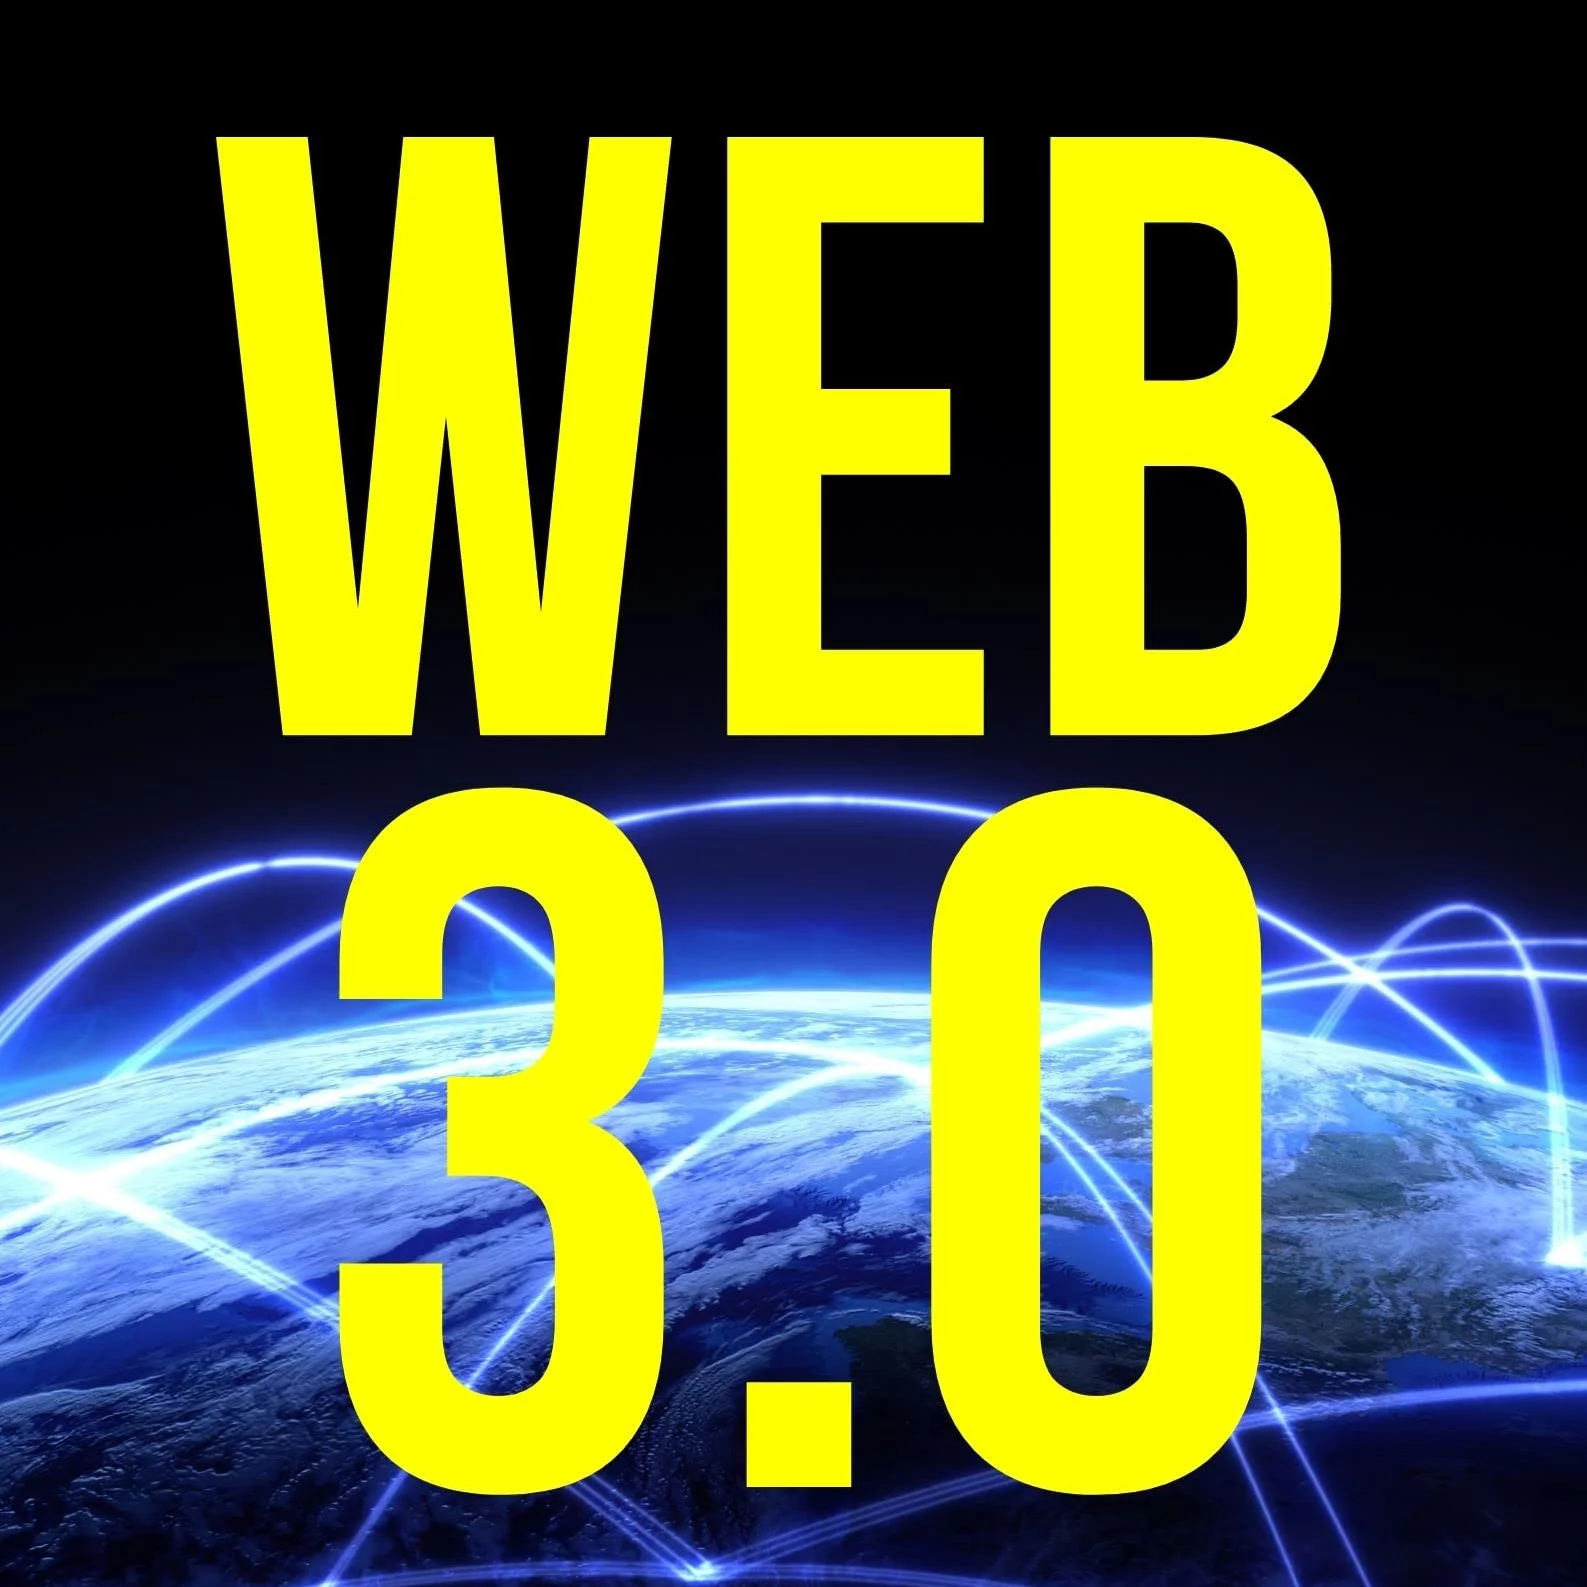 8. Difficulties with Web 3.0